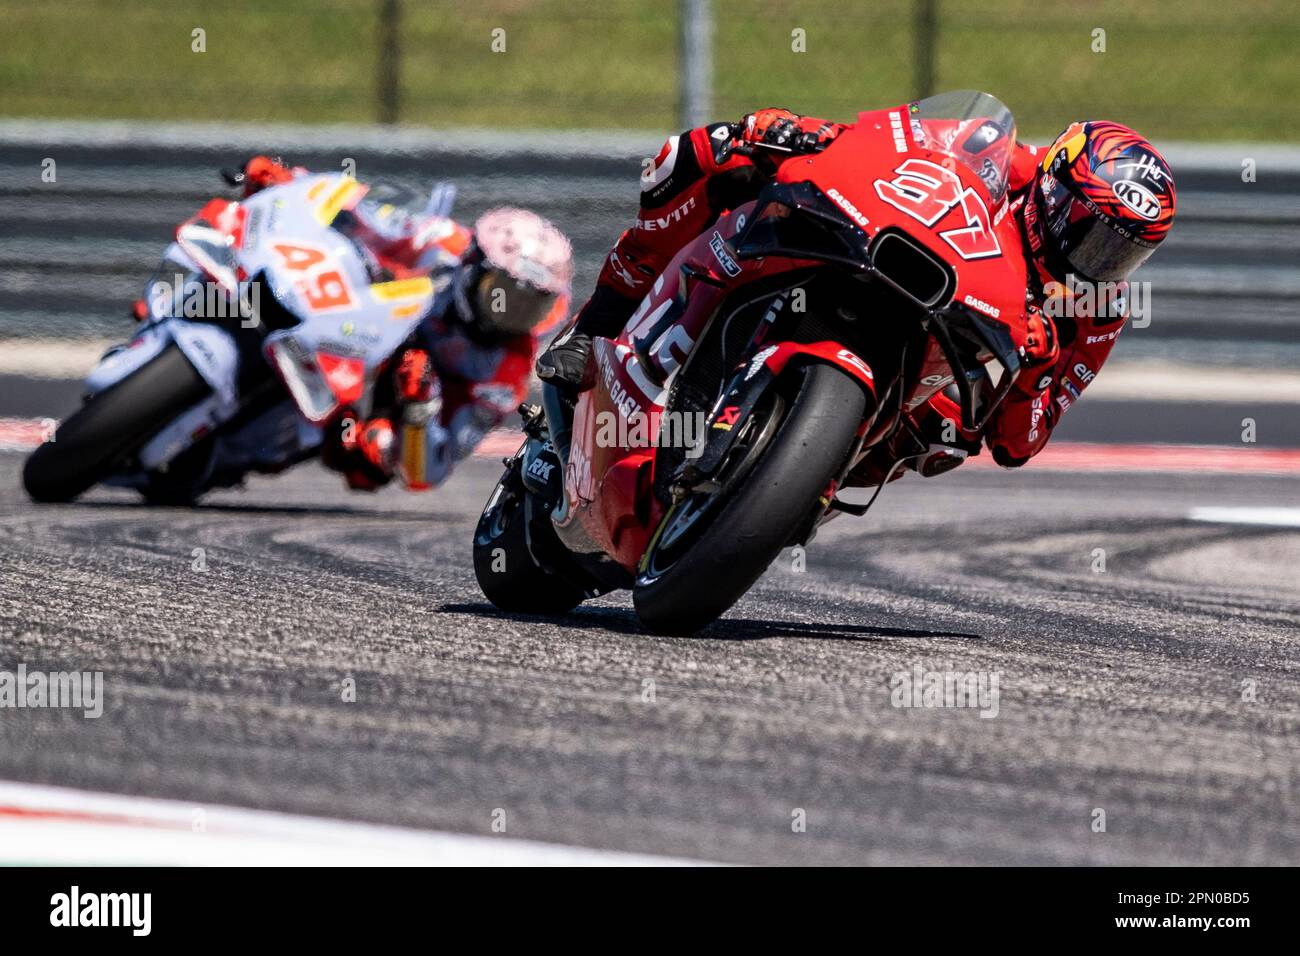 April 15, 2023.Augusto Fernandez #37 with Tech 3 in action at MotoGP during the Tissot Sprint race at the Red Bull Grand Prix at Circuit of the Americas in Austin Texas